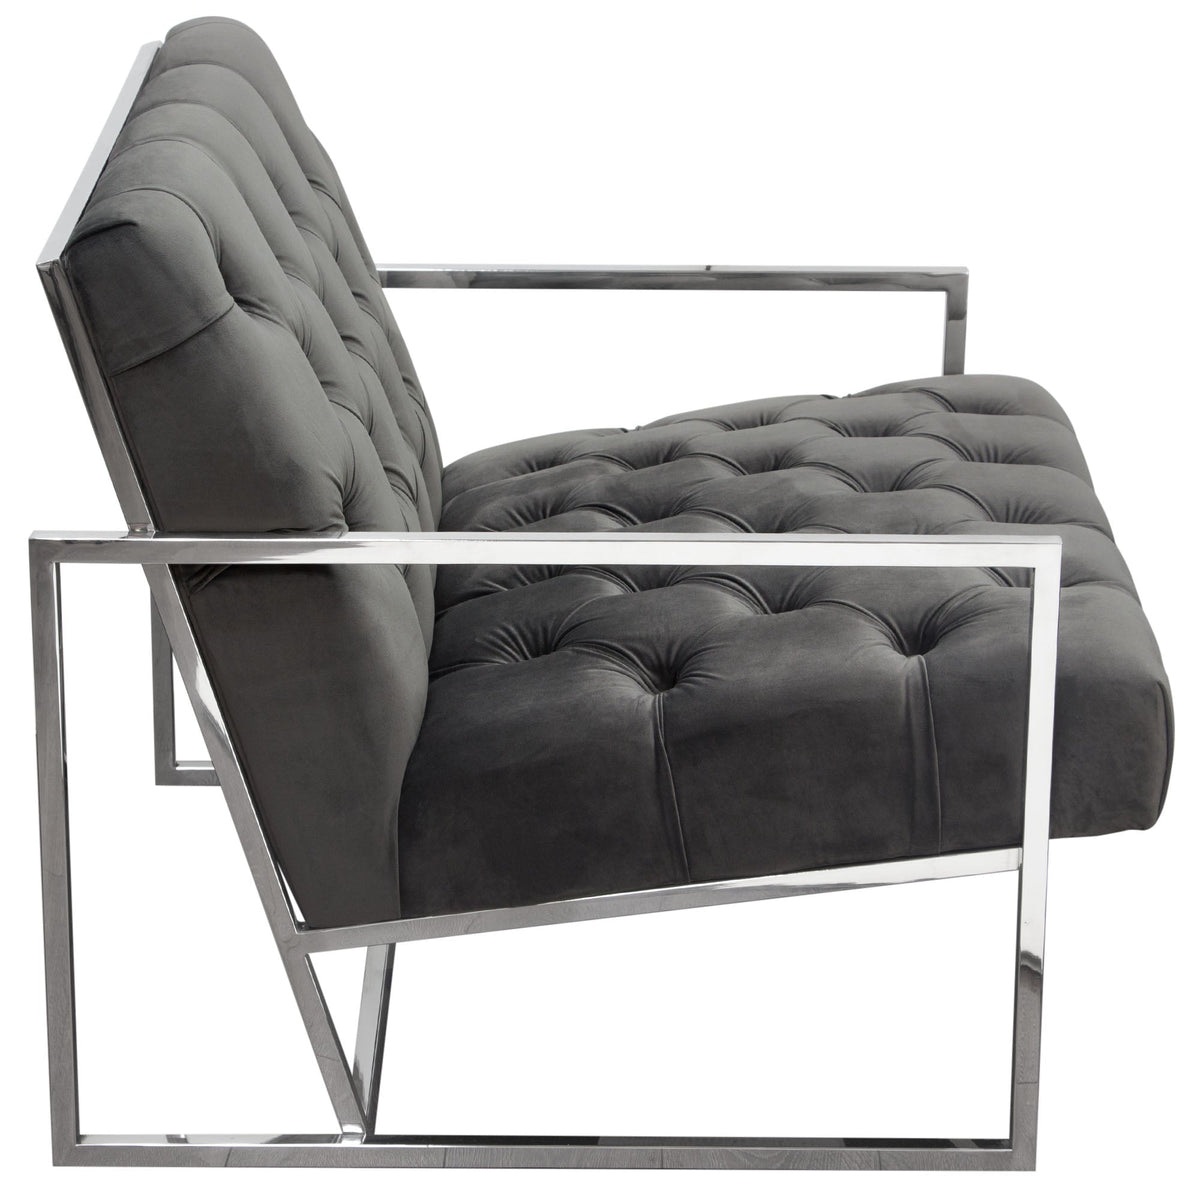 Melany Dusk Grey Tufted Velvet with Polished Stainless Accent Chair - Luxury Living Collection